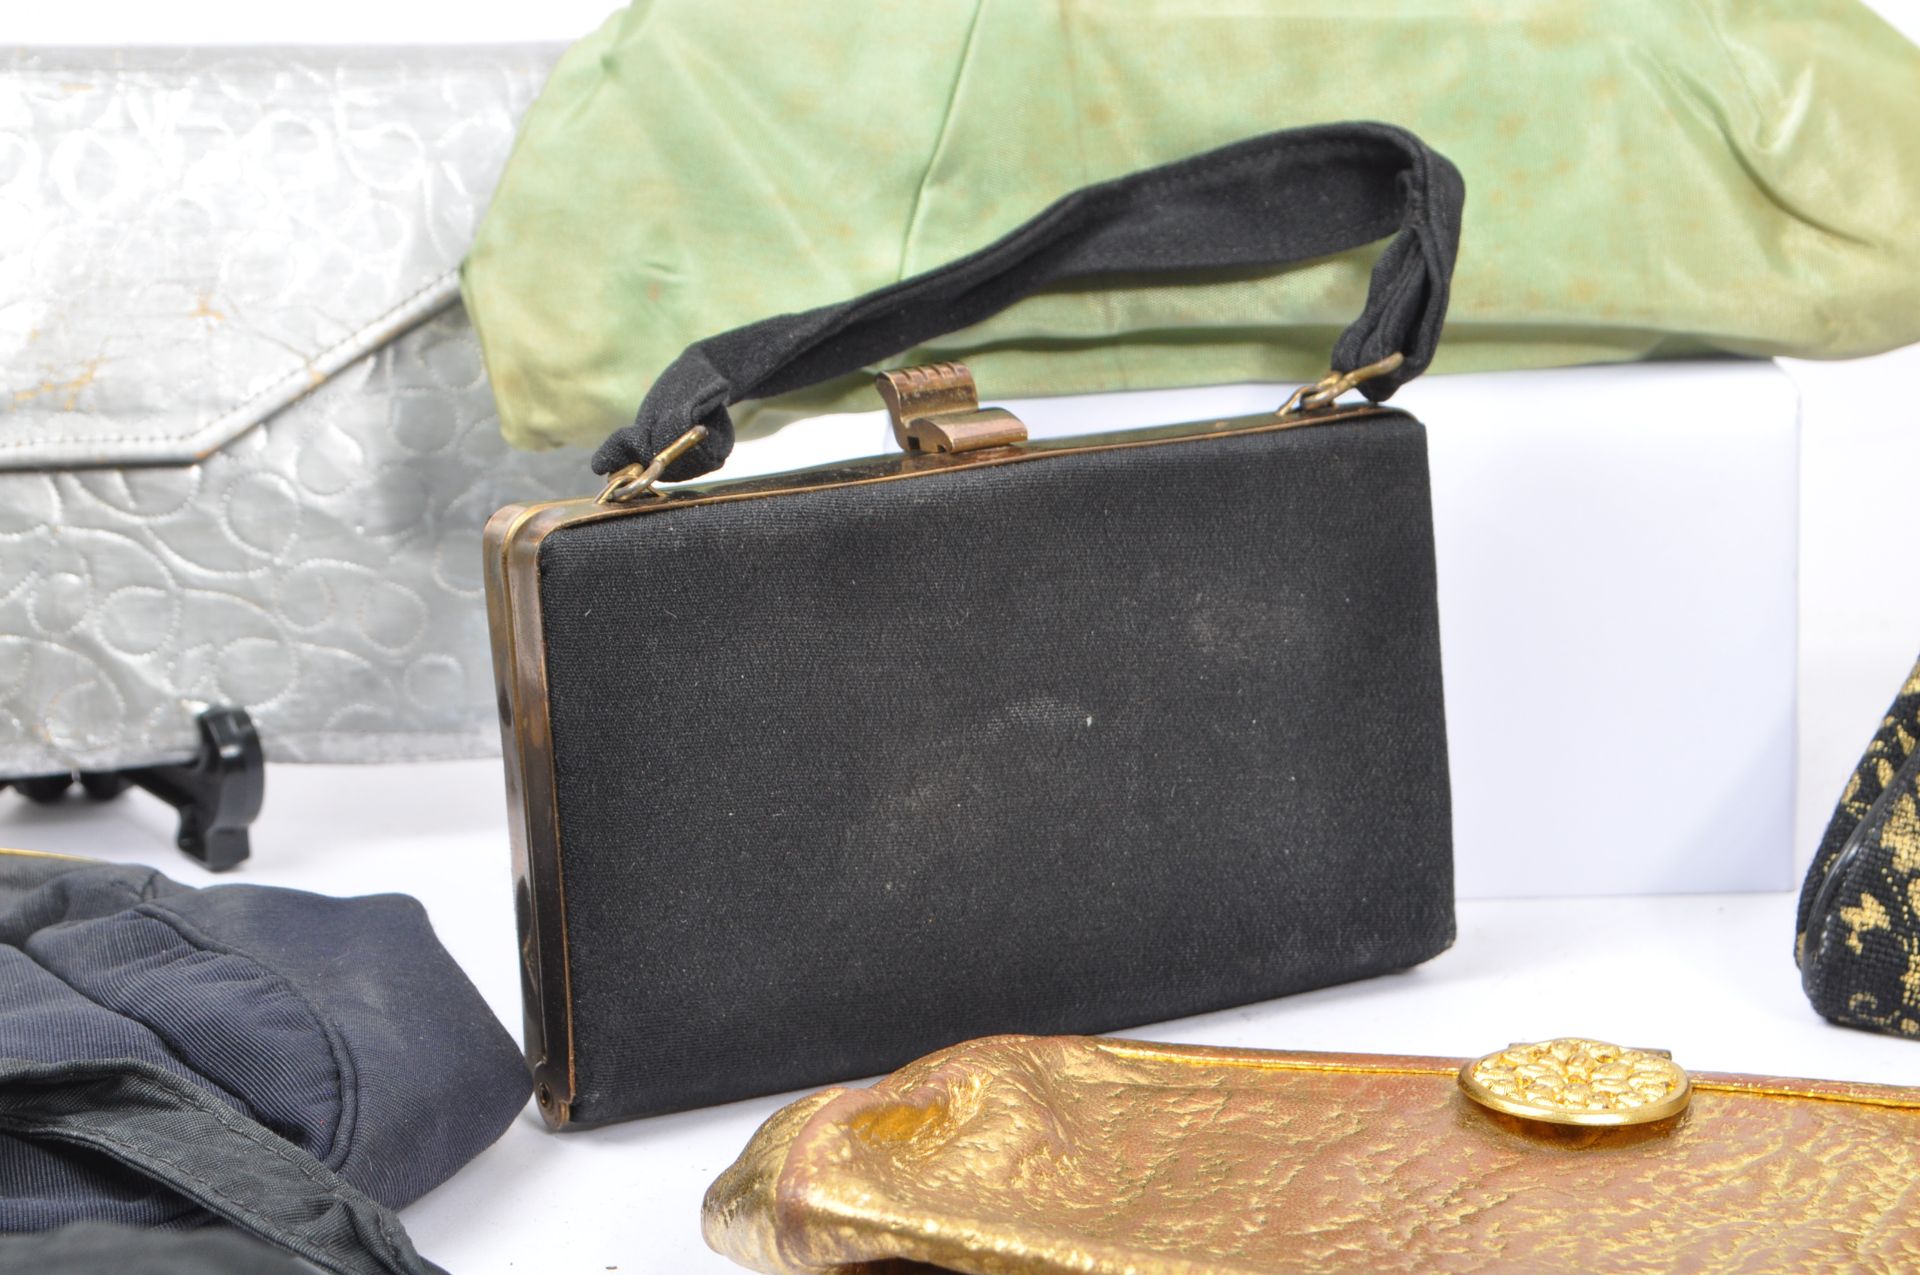 COLLECTION OF VINTAGE 1930S FASHION HANDBAGS AND PURSES - Image 9 of 16